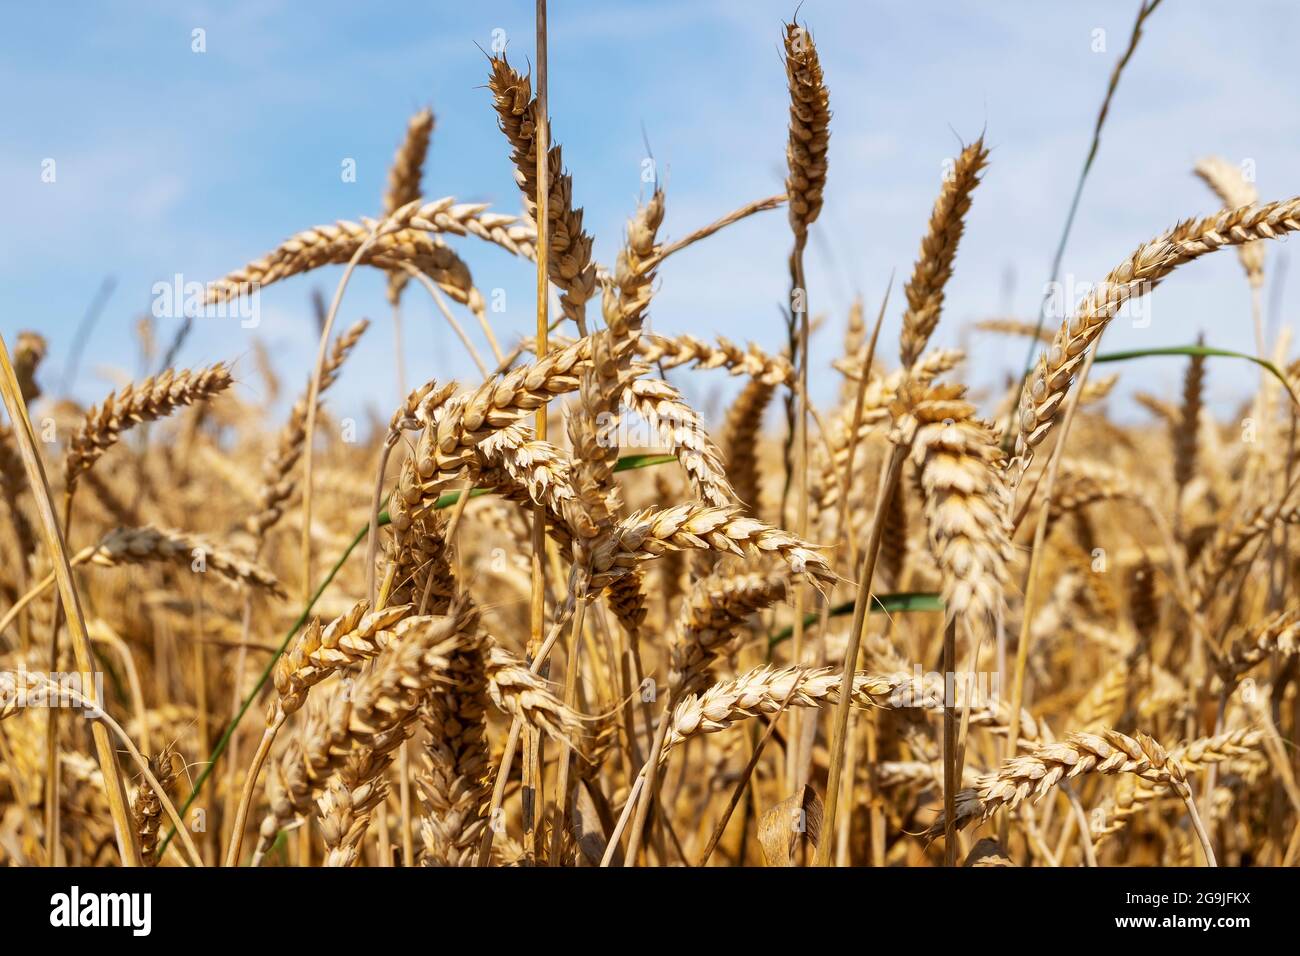 Ears of cereal crop in the field Stock Photo